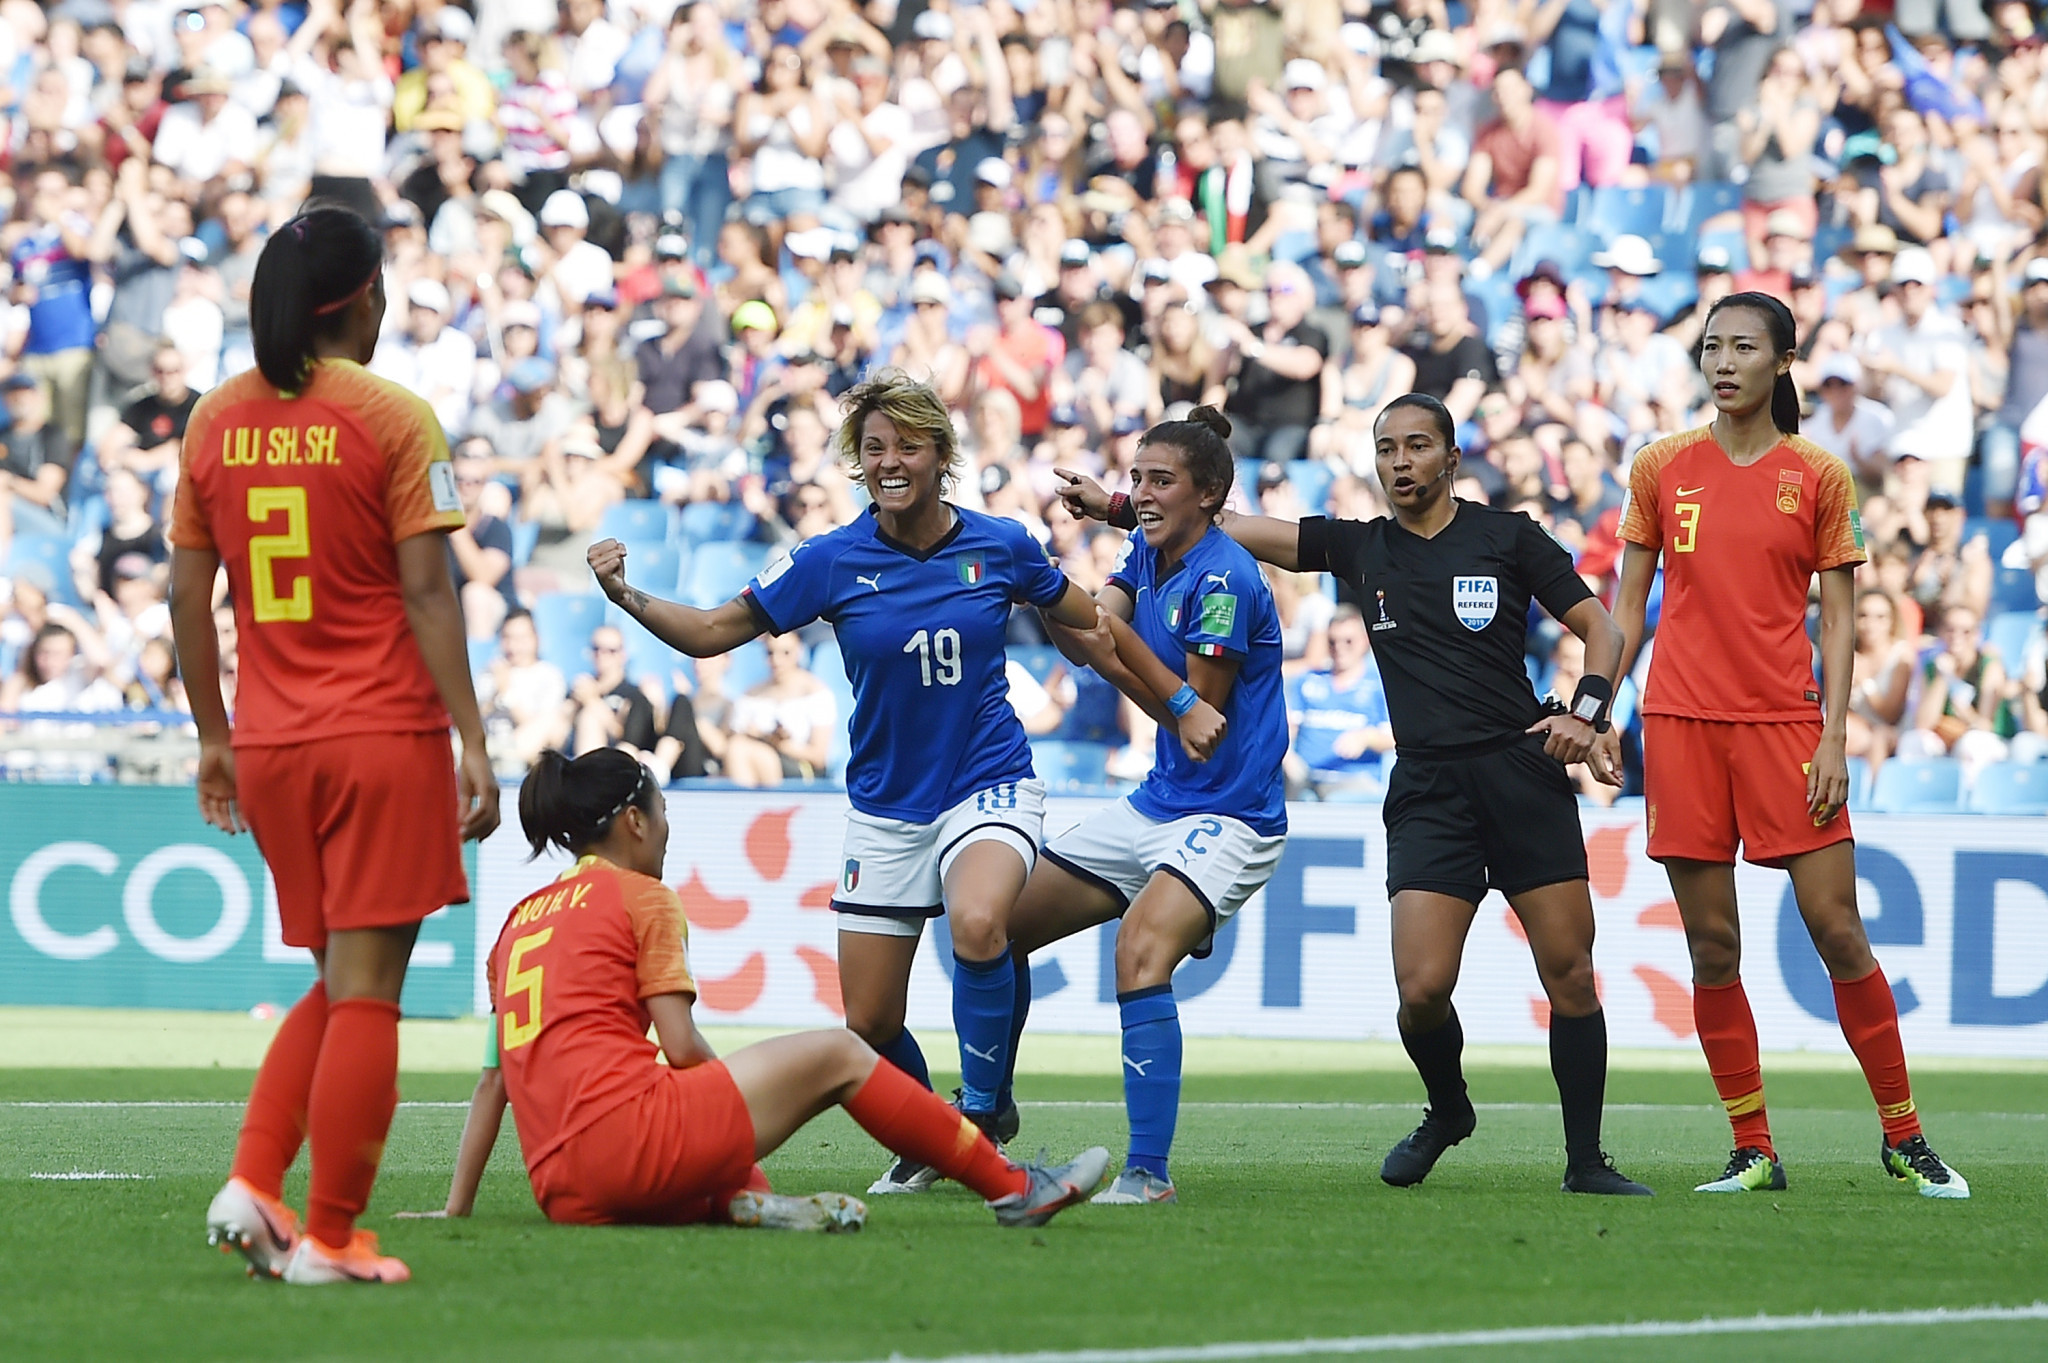 Forward Valentina Giacinti put Italy into a 15th-minute lead ©Getty Images